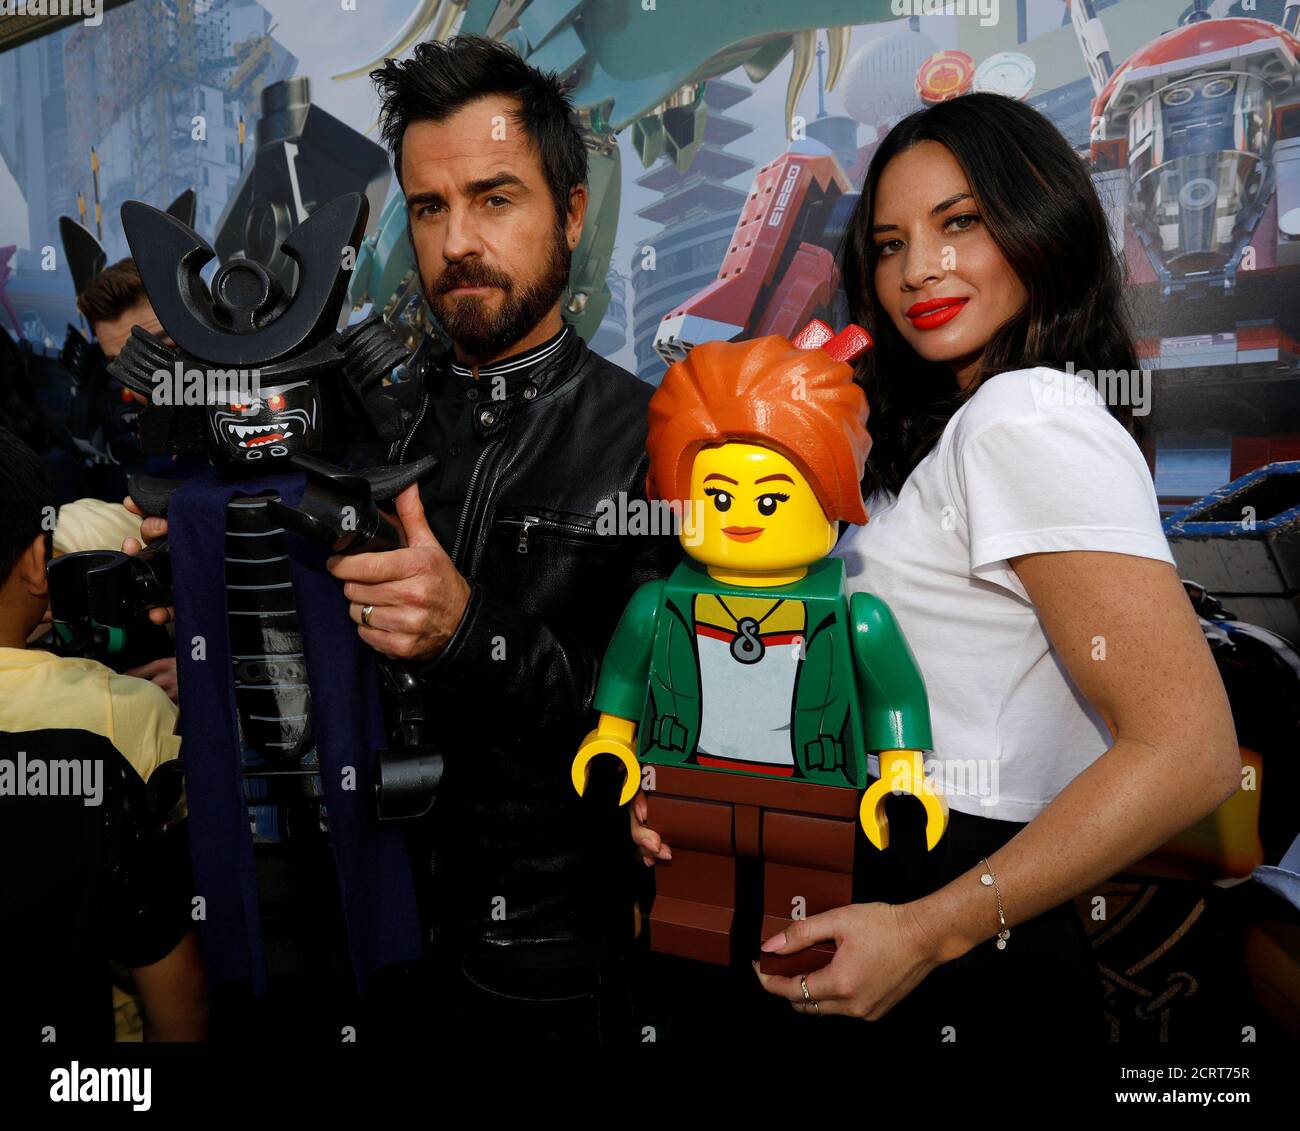 Cast members Olivia Munn and Justin Theroux hold their respective characters of Koko and Garmadon at an event for "The LEGO Movie" during 2017 Comic-Con Convention in Diego,